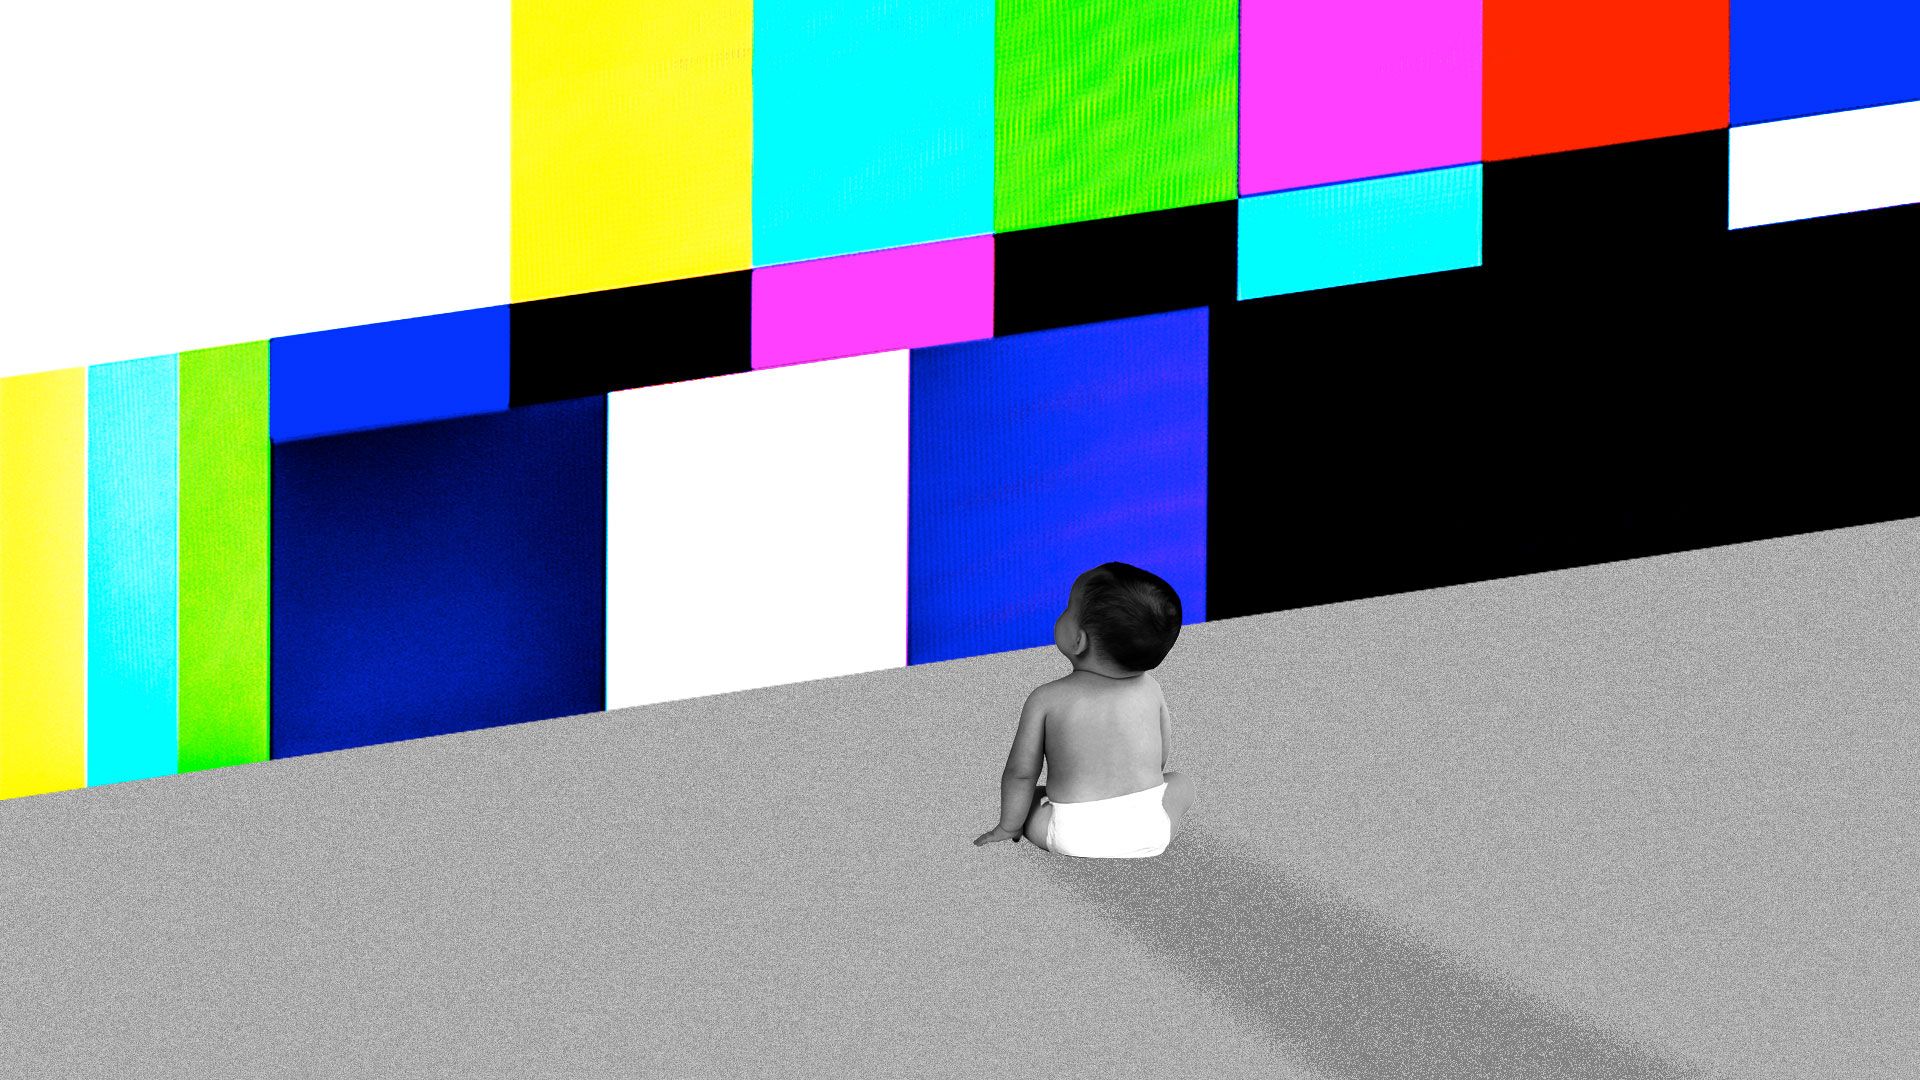 In this image, a baby faces a large multi-colored screen. 